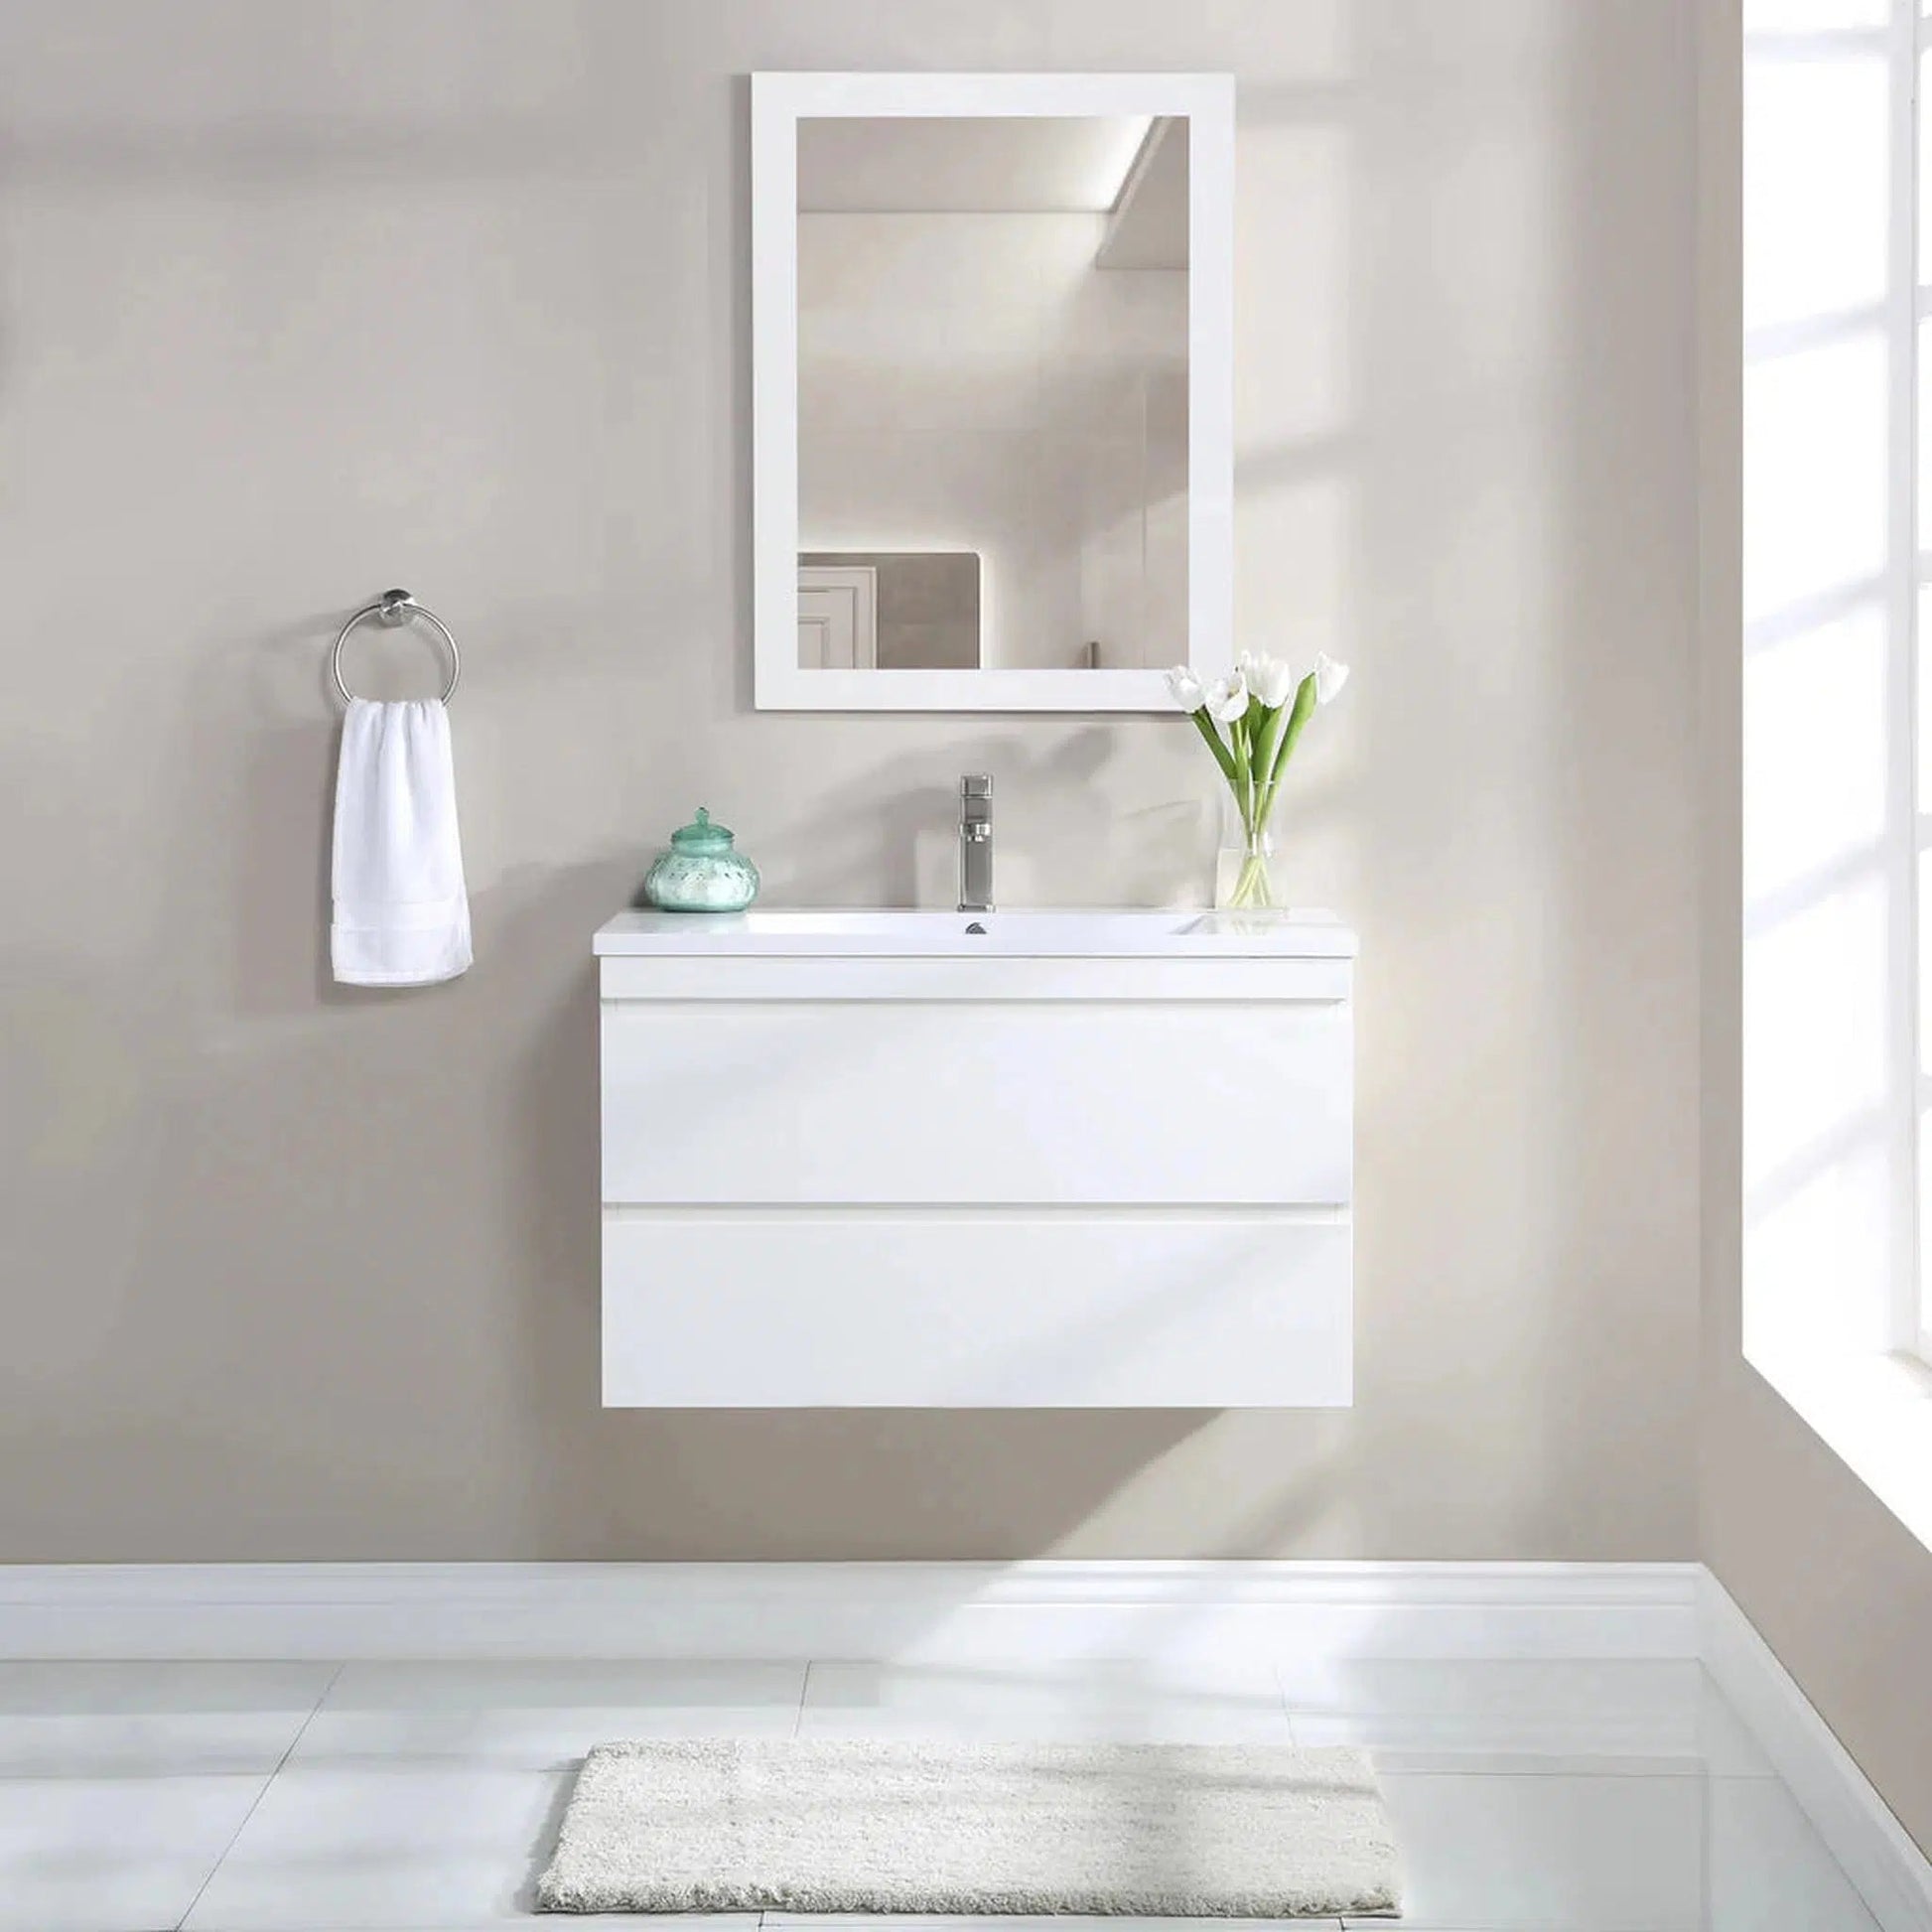 Stufurhome Vivian 36" Gloss White Wall-Mounted Resin Single Sink Bathroom Vanity with 2 Slow Close Drawers and One Pre-Drilled Faucet Hole